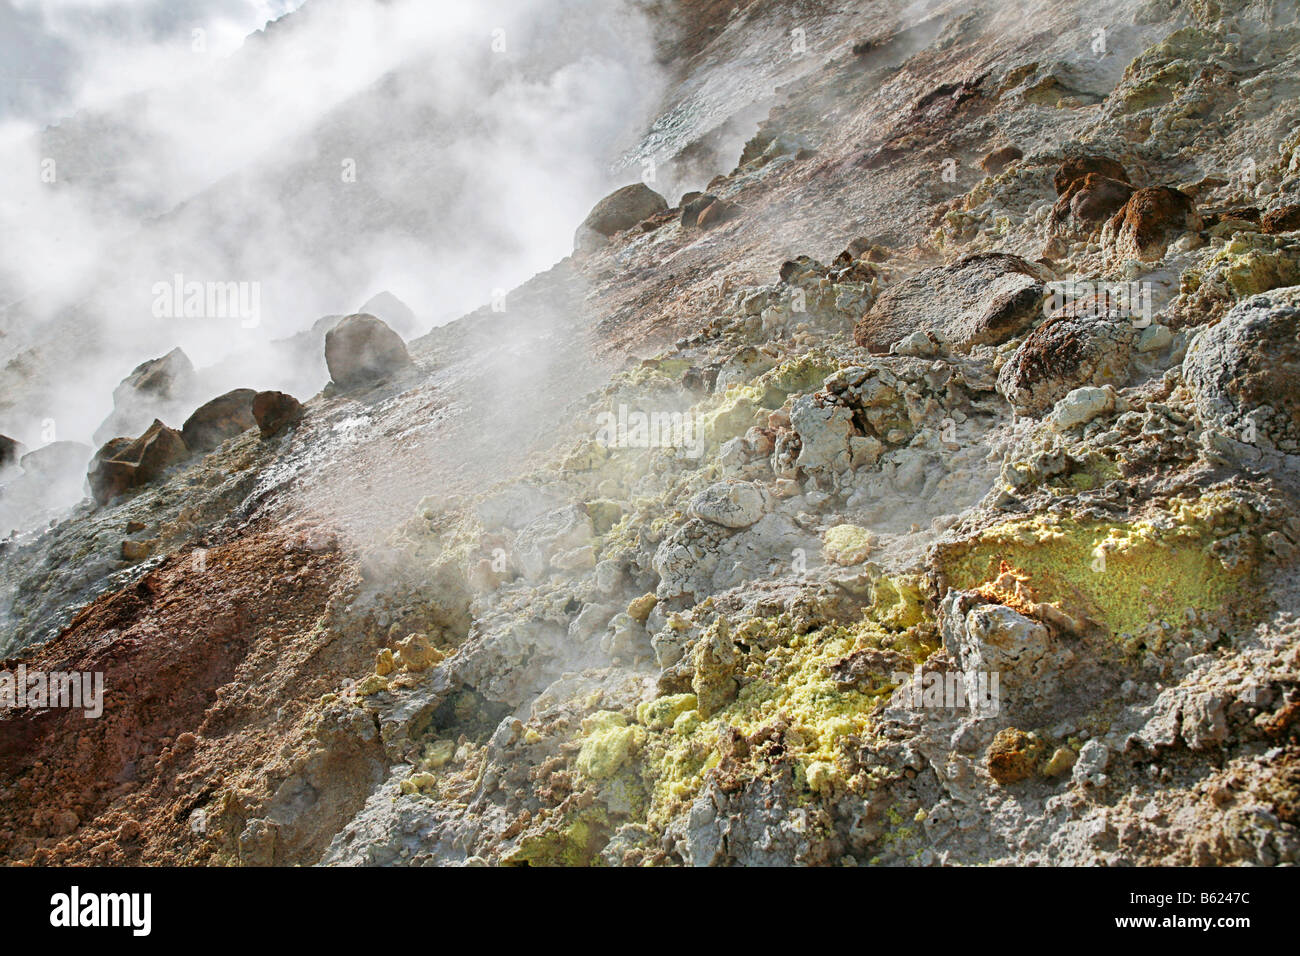 Steaming sulfur-covered holes and fractures, geothermal region of Seltun on southern Iceland, Iceland, Europe Stock Photo